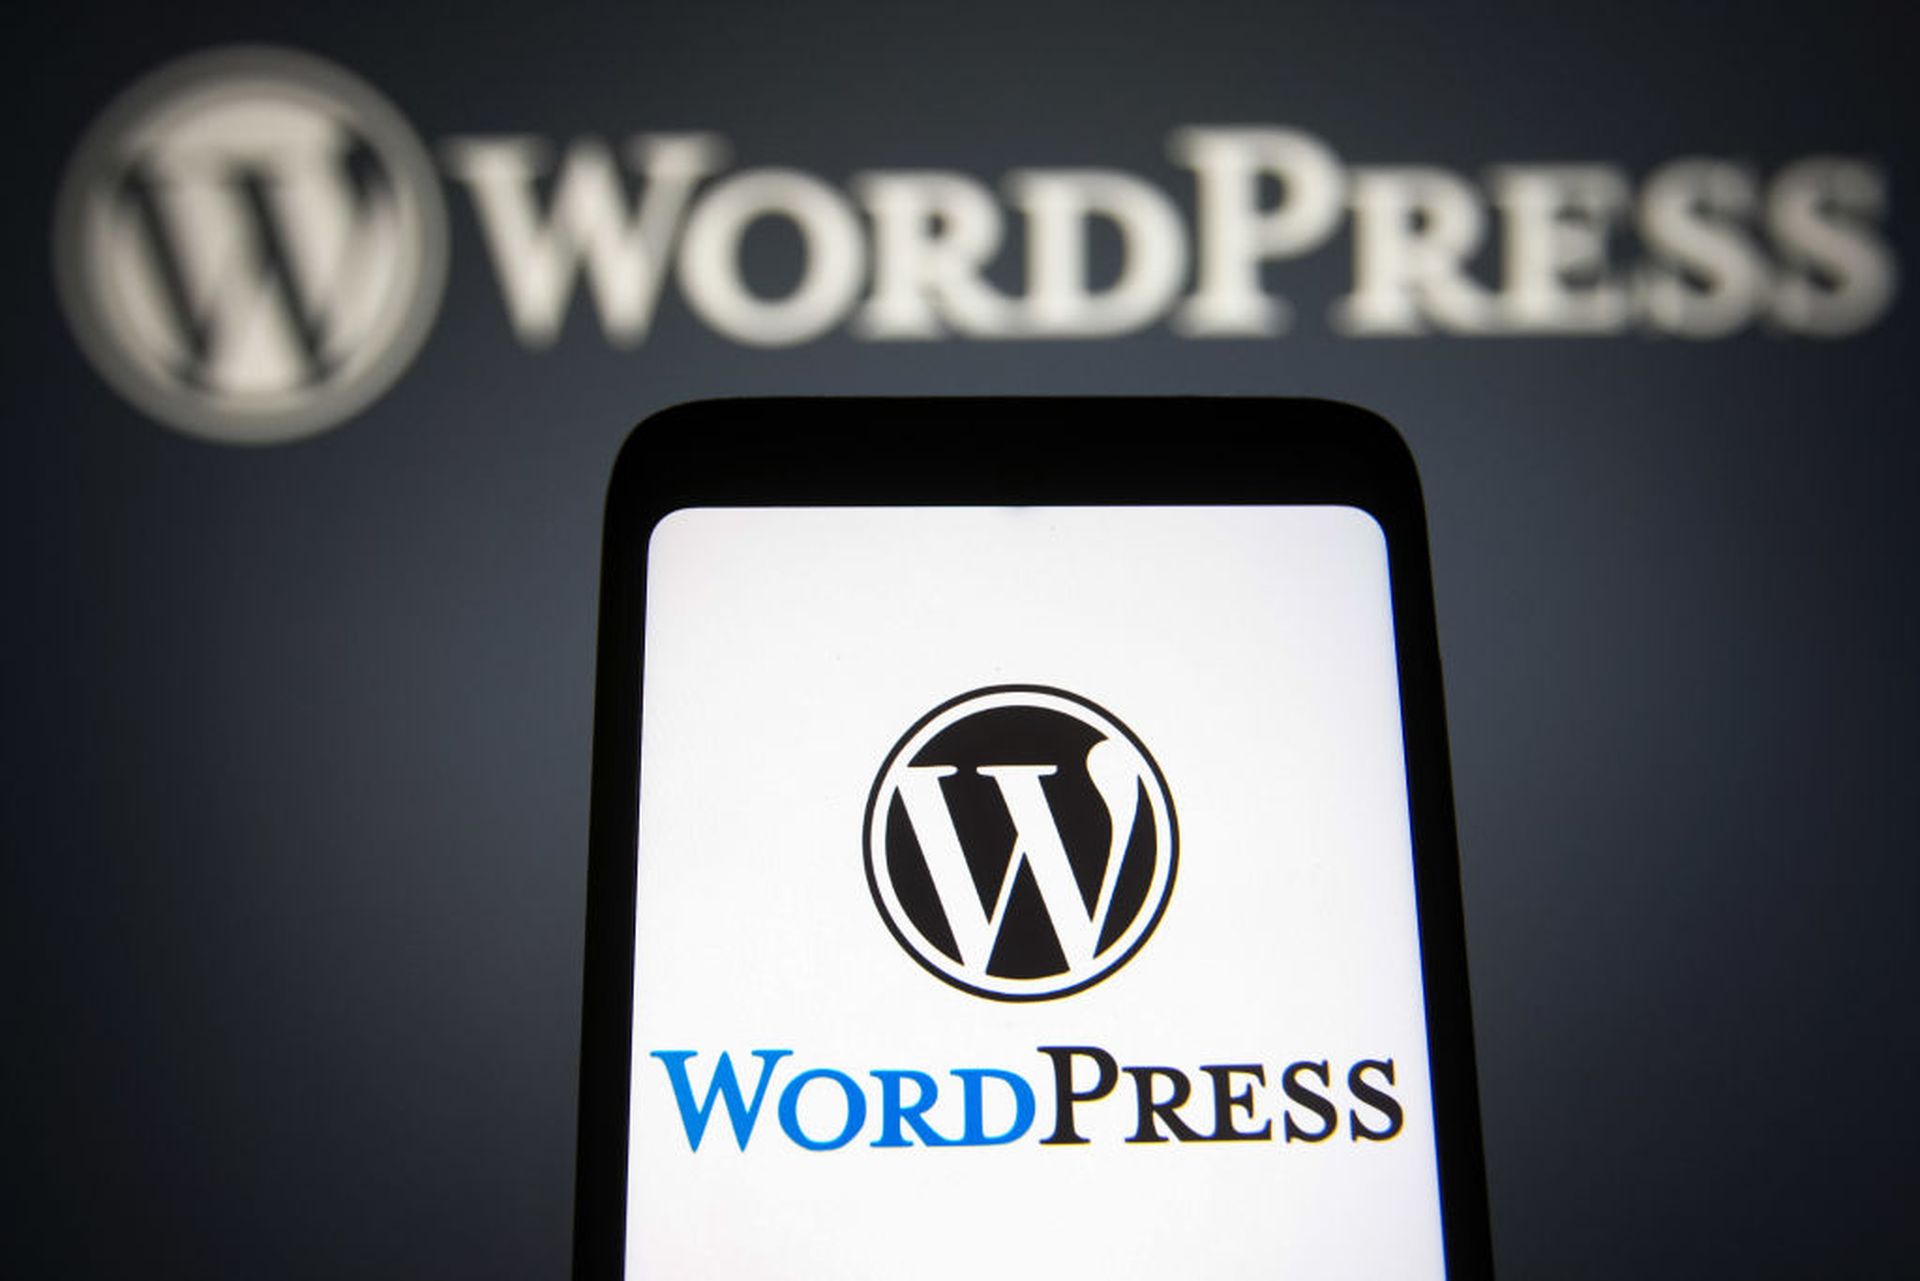 UKRAINE &#8211; 2021/11/22: In this photo illustration, the WordPress (WP, WordPress.org) logo is seen on a smartphone and in the background. (Photo Illustration by Pavlo Gonchar/SOPA Images/LightRocket via Getty Images)